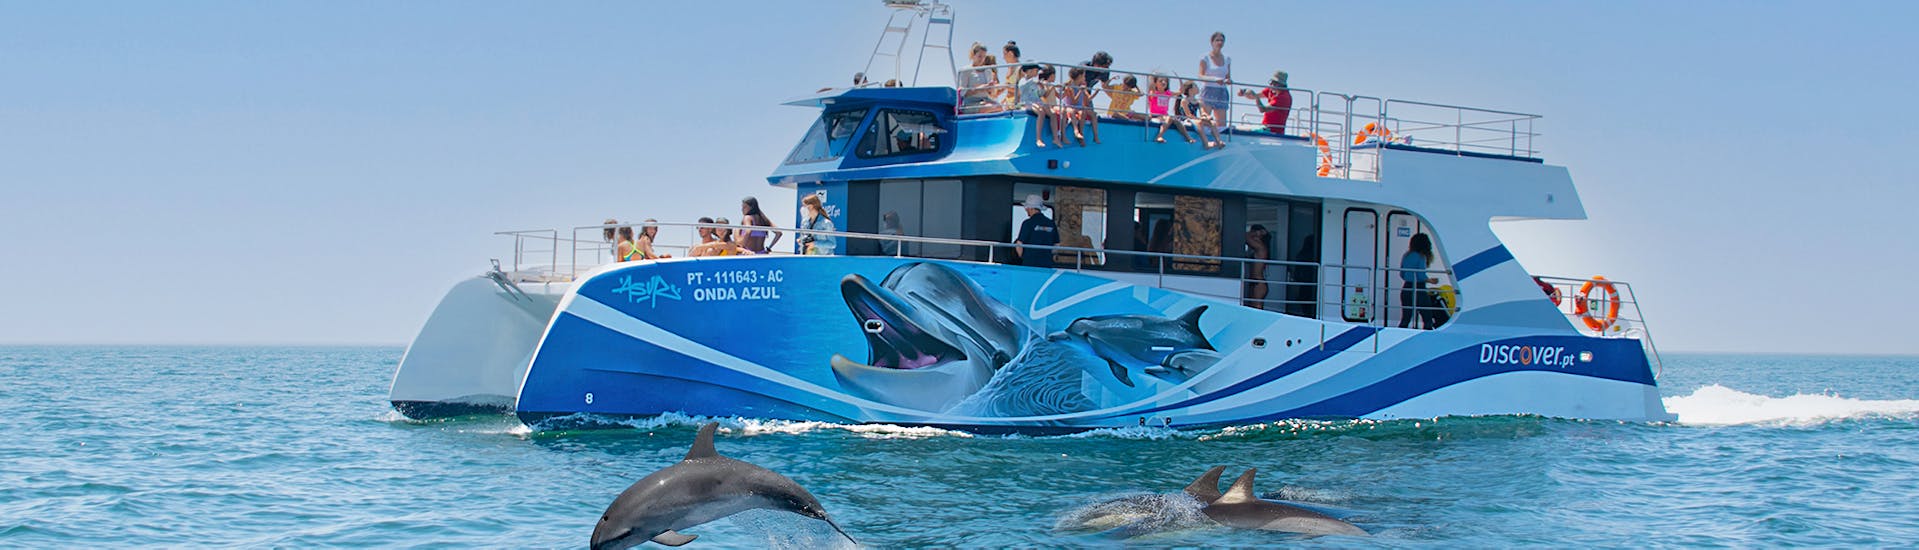 Dolphins swimming next to the boat used by Discover Tours Lagos for the Catamaran Trip around Lagos with Dolphin Watching.